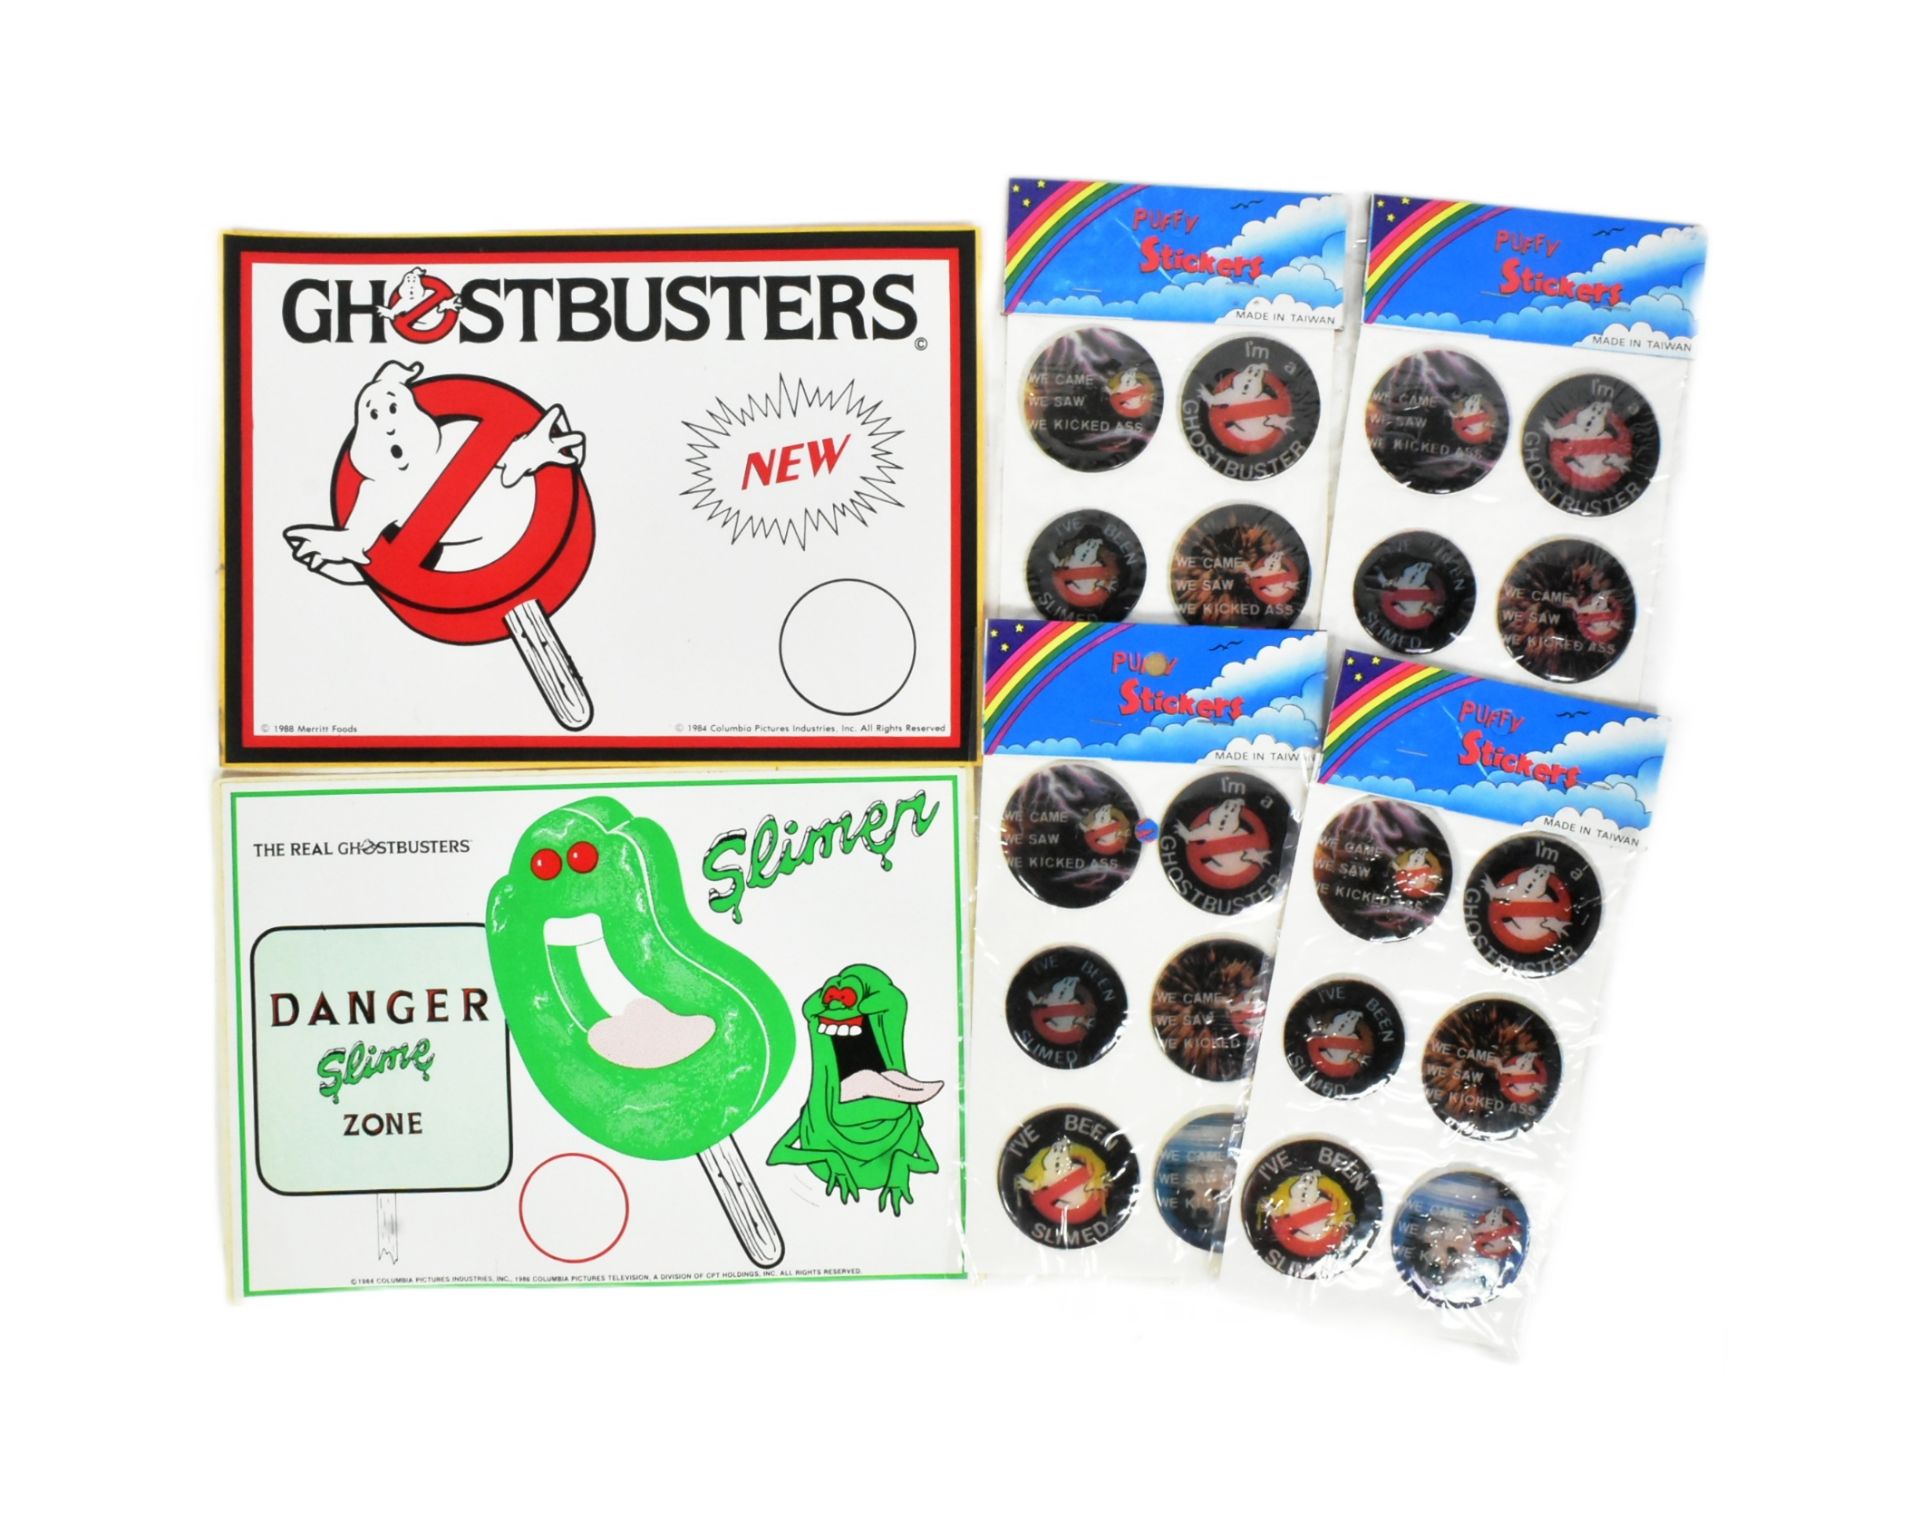 GHOSTBUSTERS - COLLECTION OF VINTAGE EX-SHOP STOCK MERCHANDISE